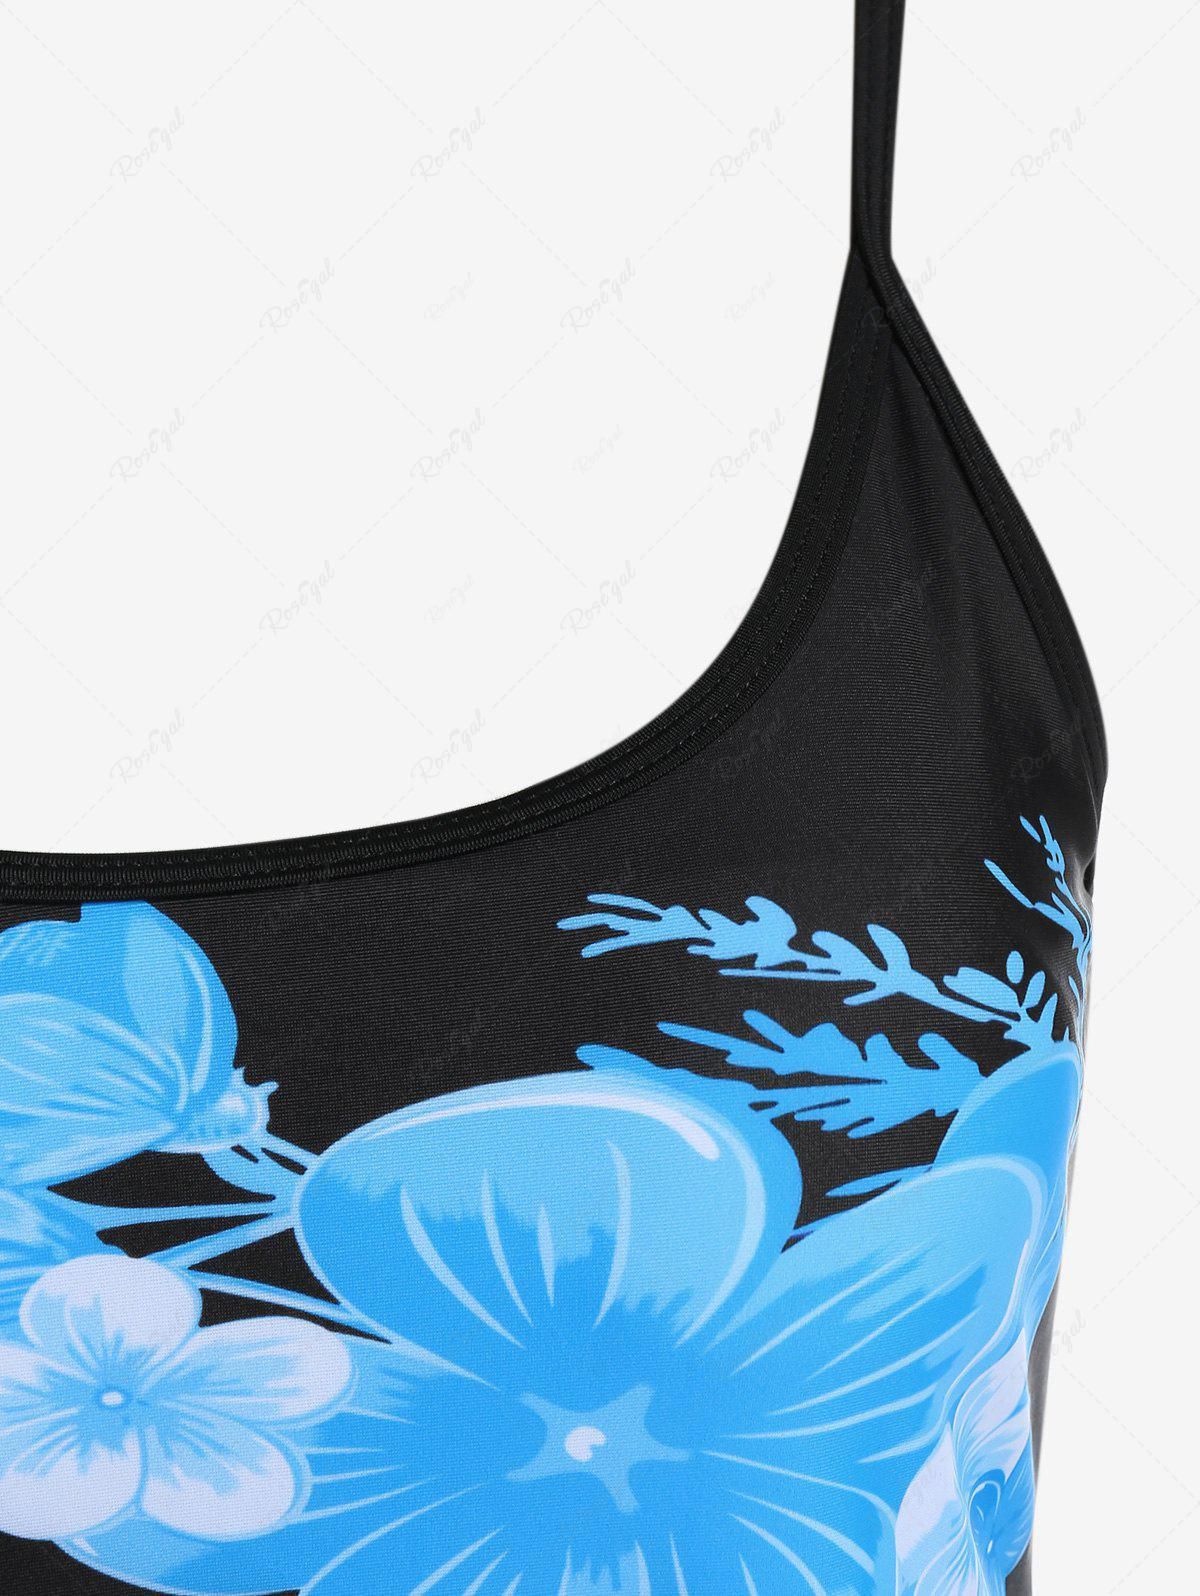 Plus Size Floral Print Padded Swim Tankini Top - 5x price from rosegal ...